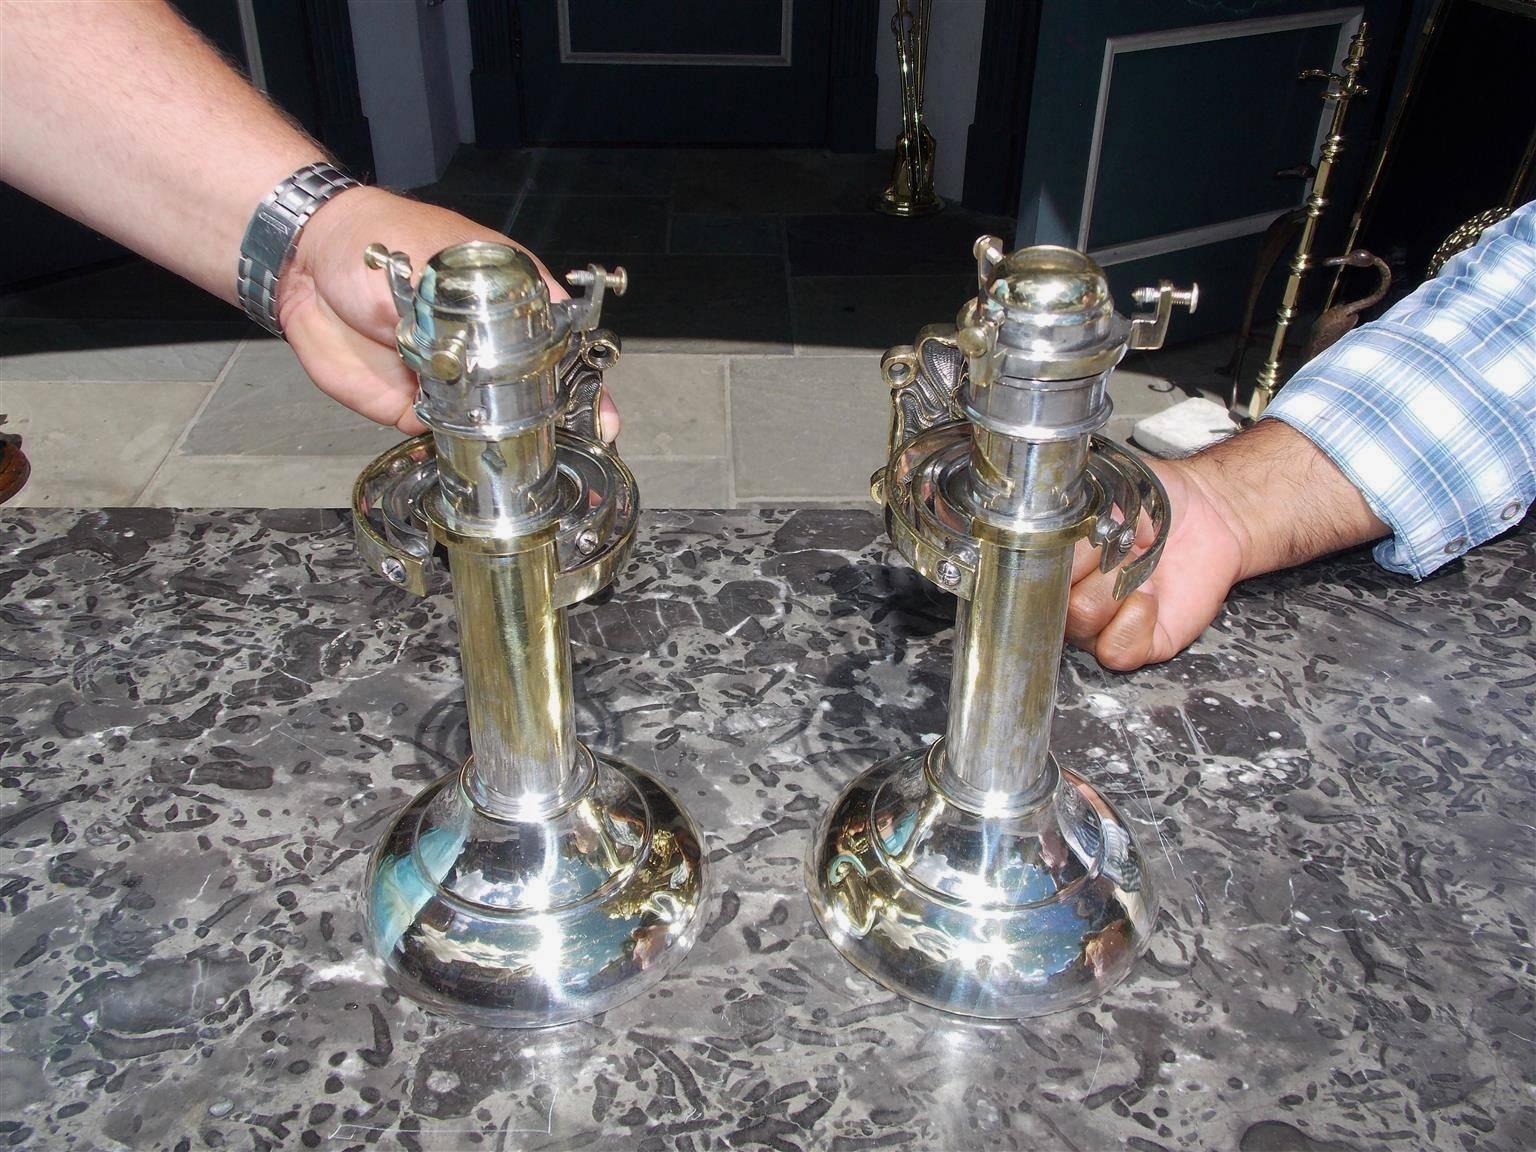 Pair of American Nautical Gimbaled Nickel Silver & Brass Wall Sconces, C. 1850 For Sale 3